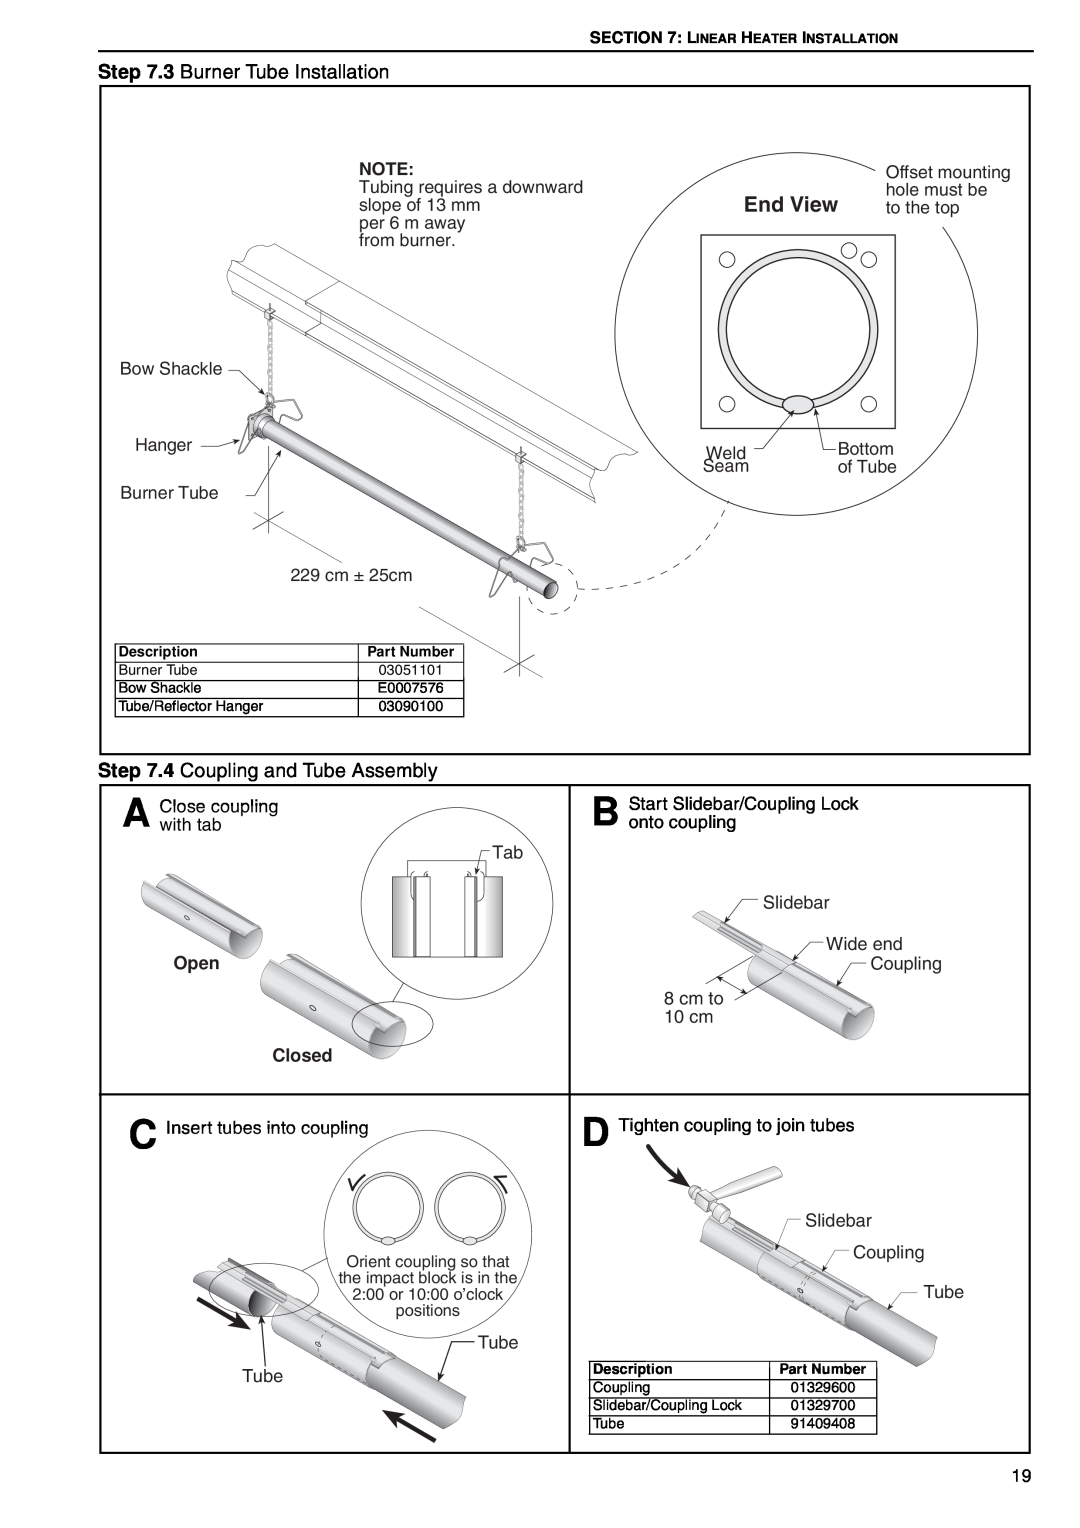 Roberts Gorden BH15 service manual End View, 3 Burner Tube Installation, 4 Coupling and Tube Assembly 